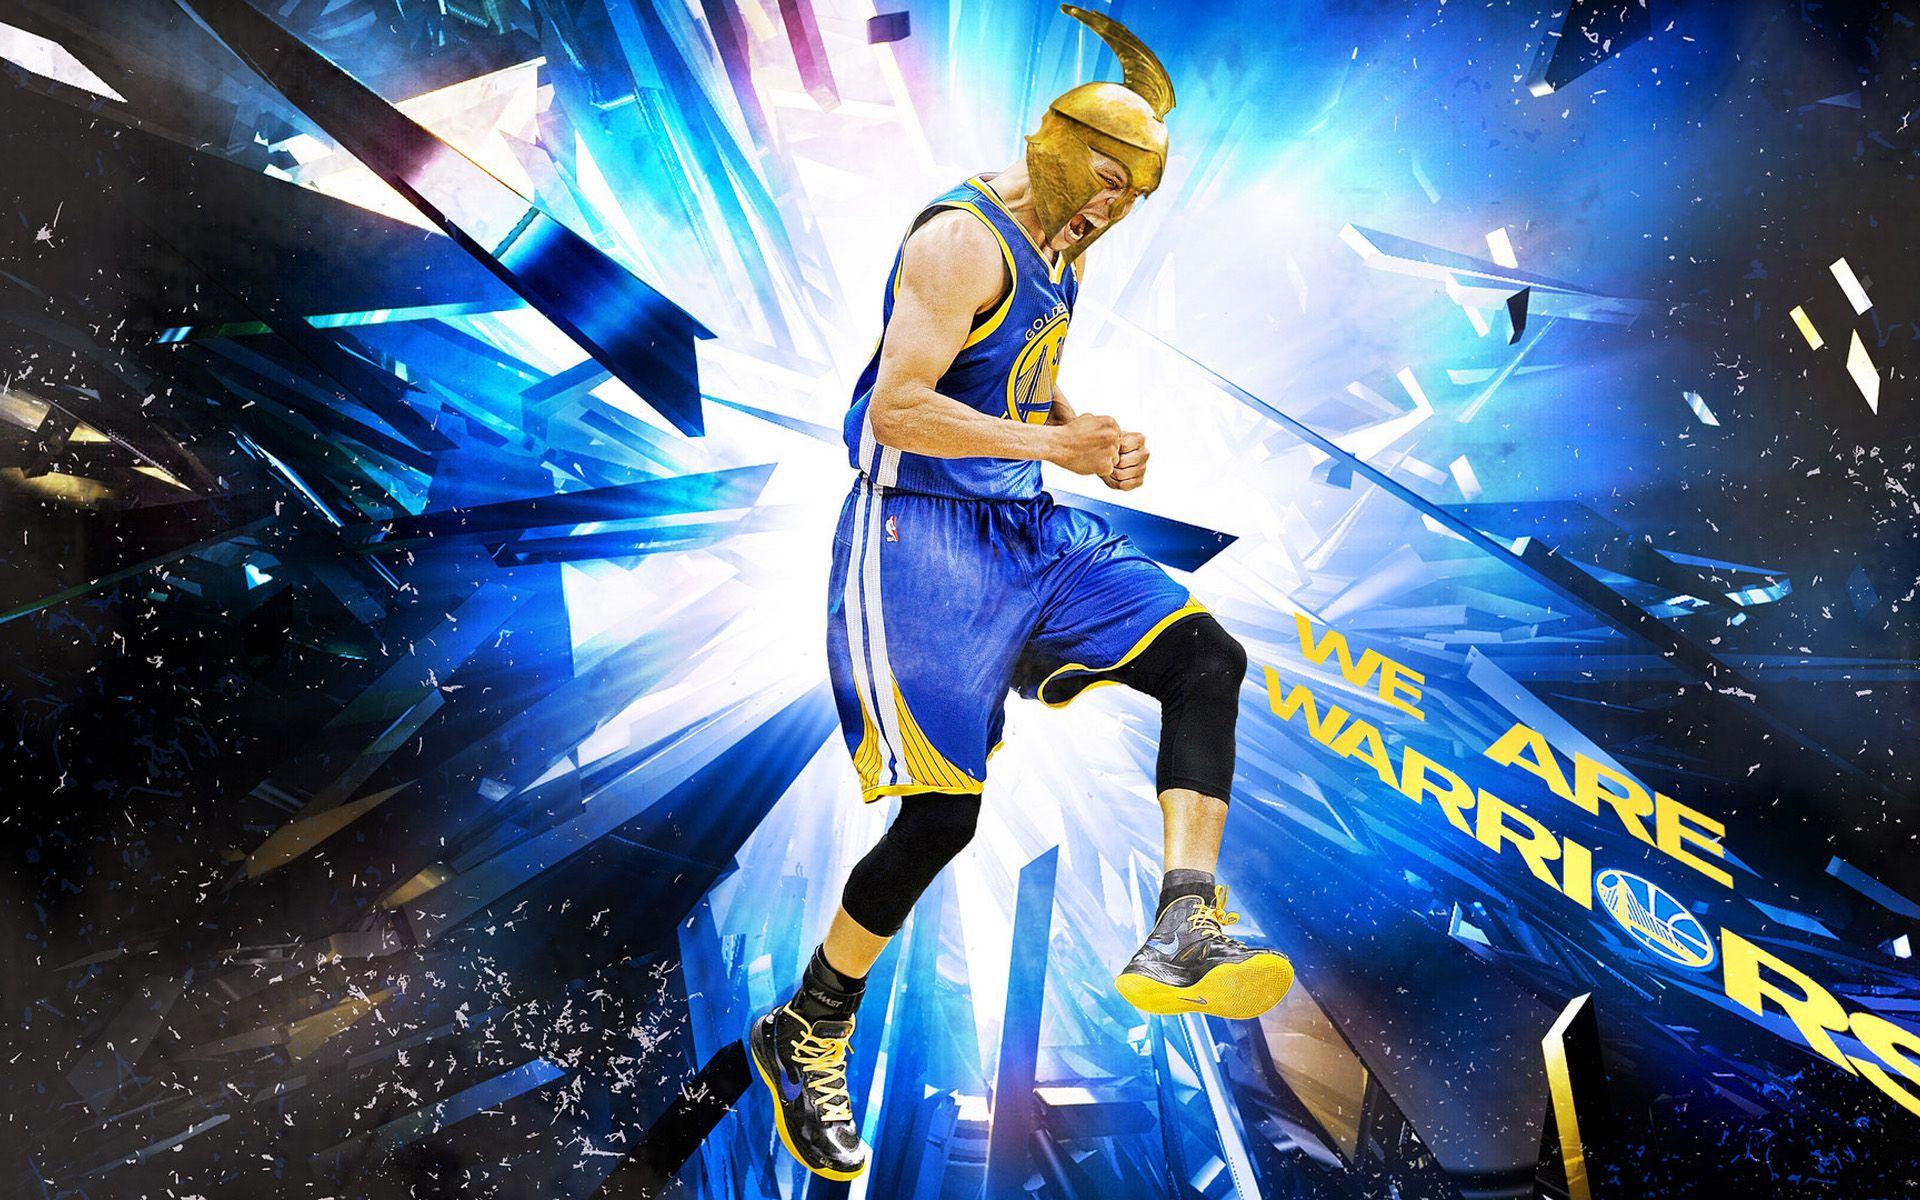 Stephen Curry On Fire Wallpaper, Fine HDQ Stephen Curry On Fire